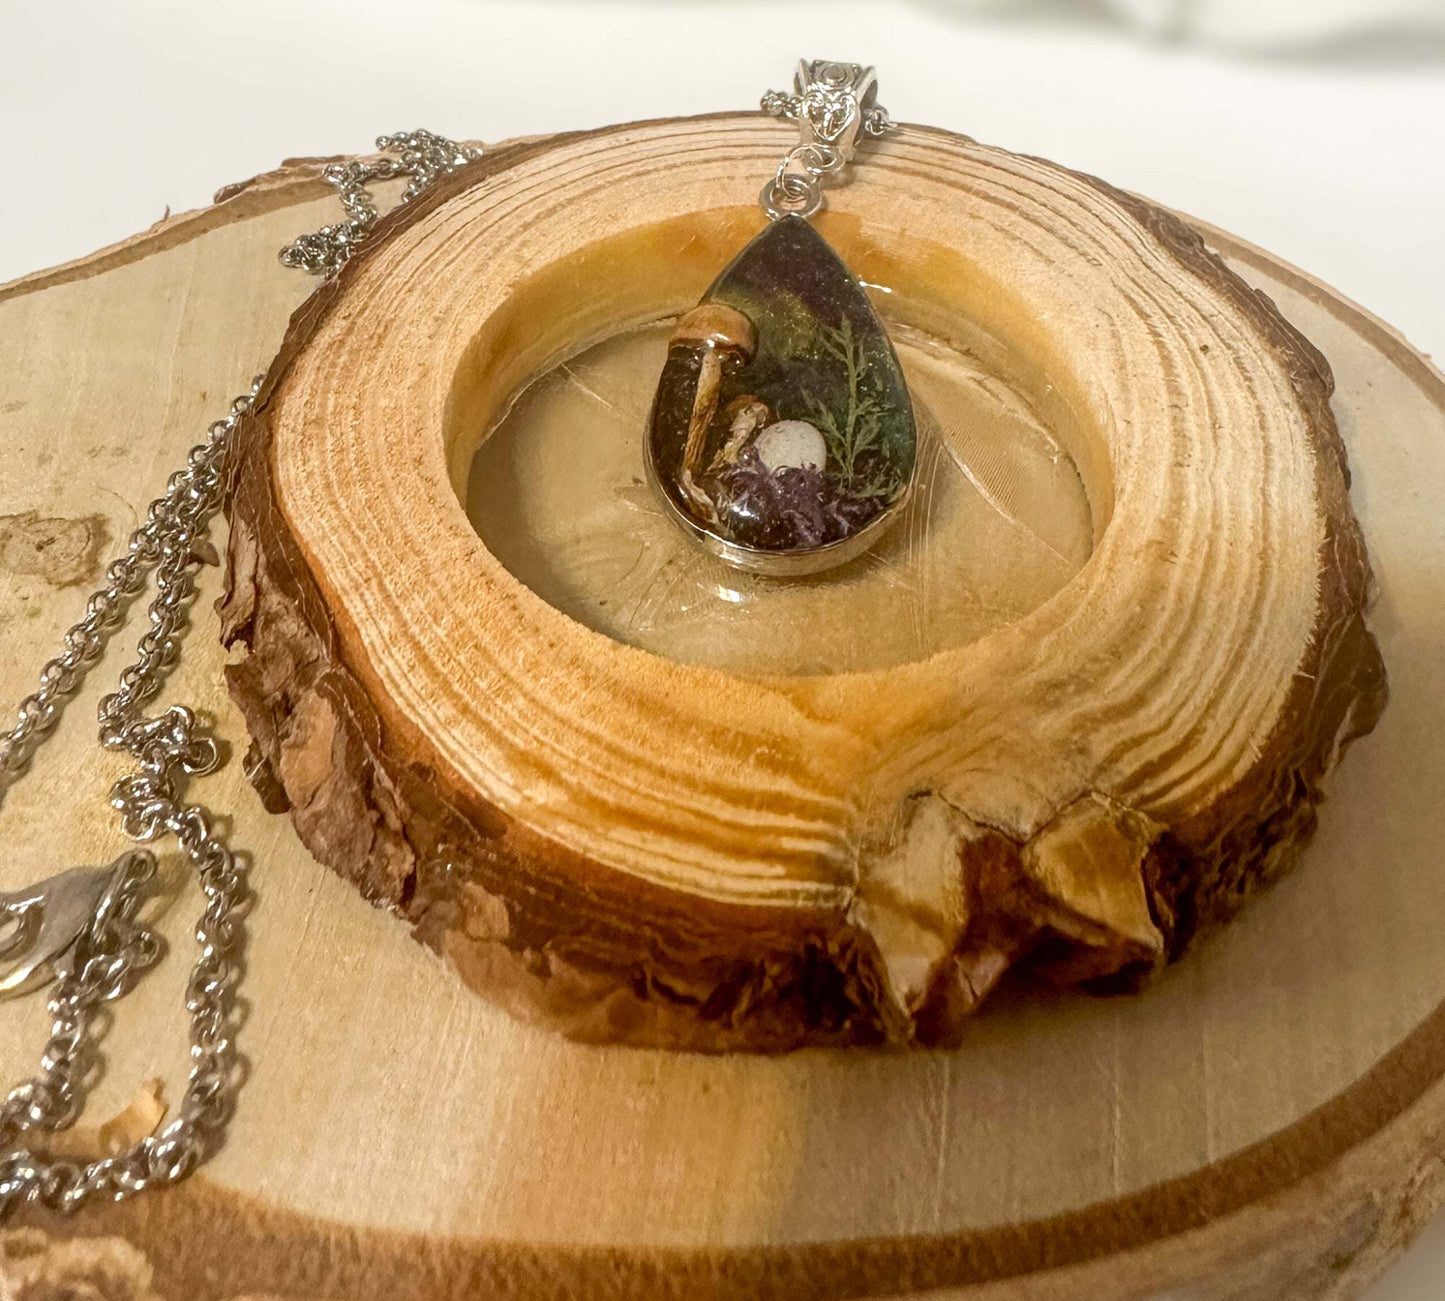 Forest Elegance: Teardrop Pendant with Northern Lights and Mushrooms